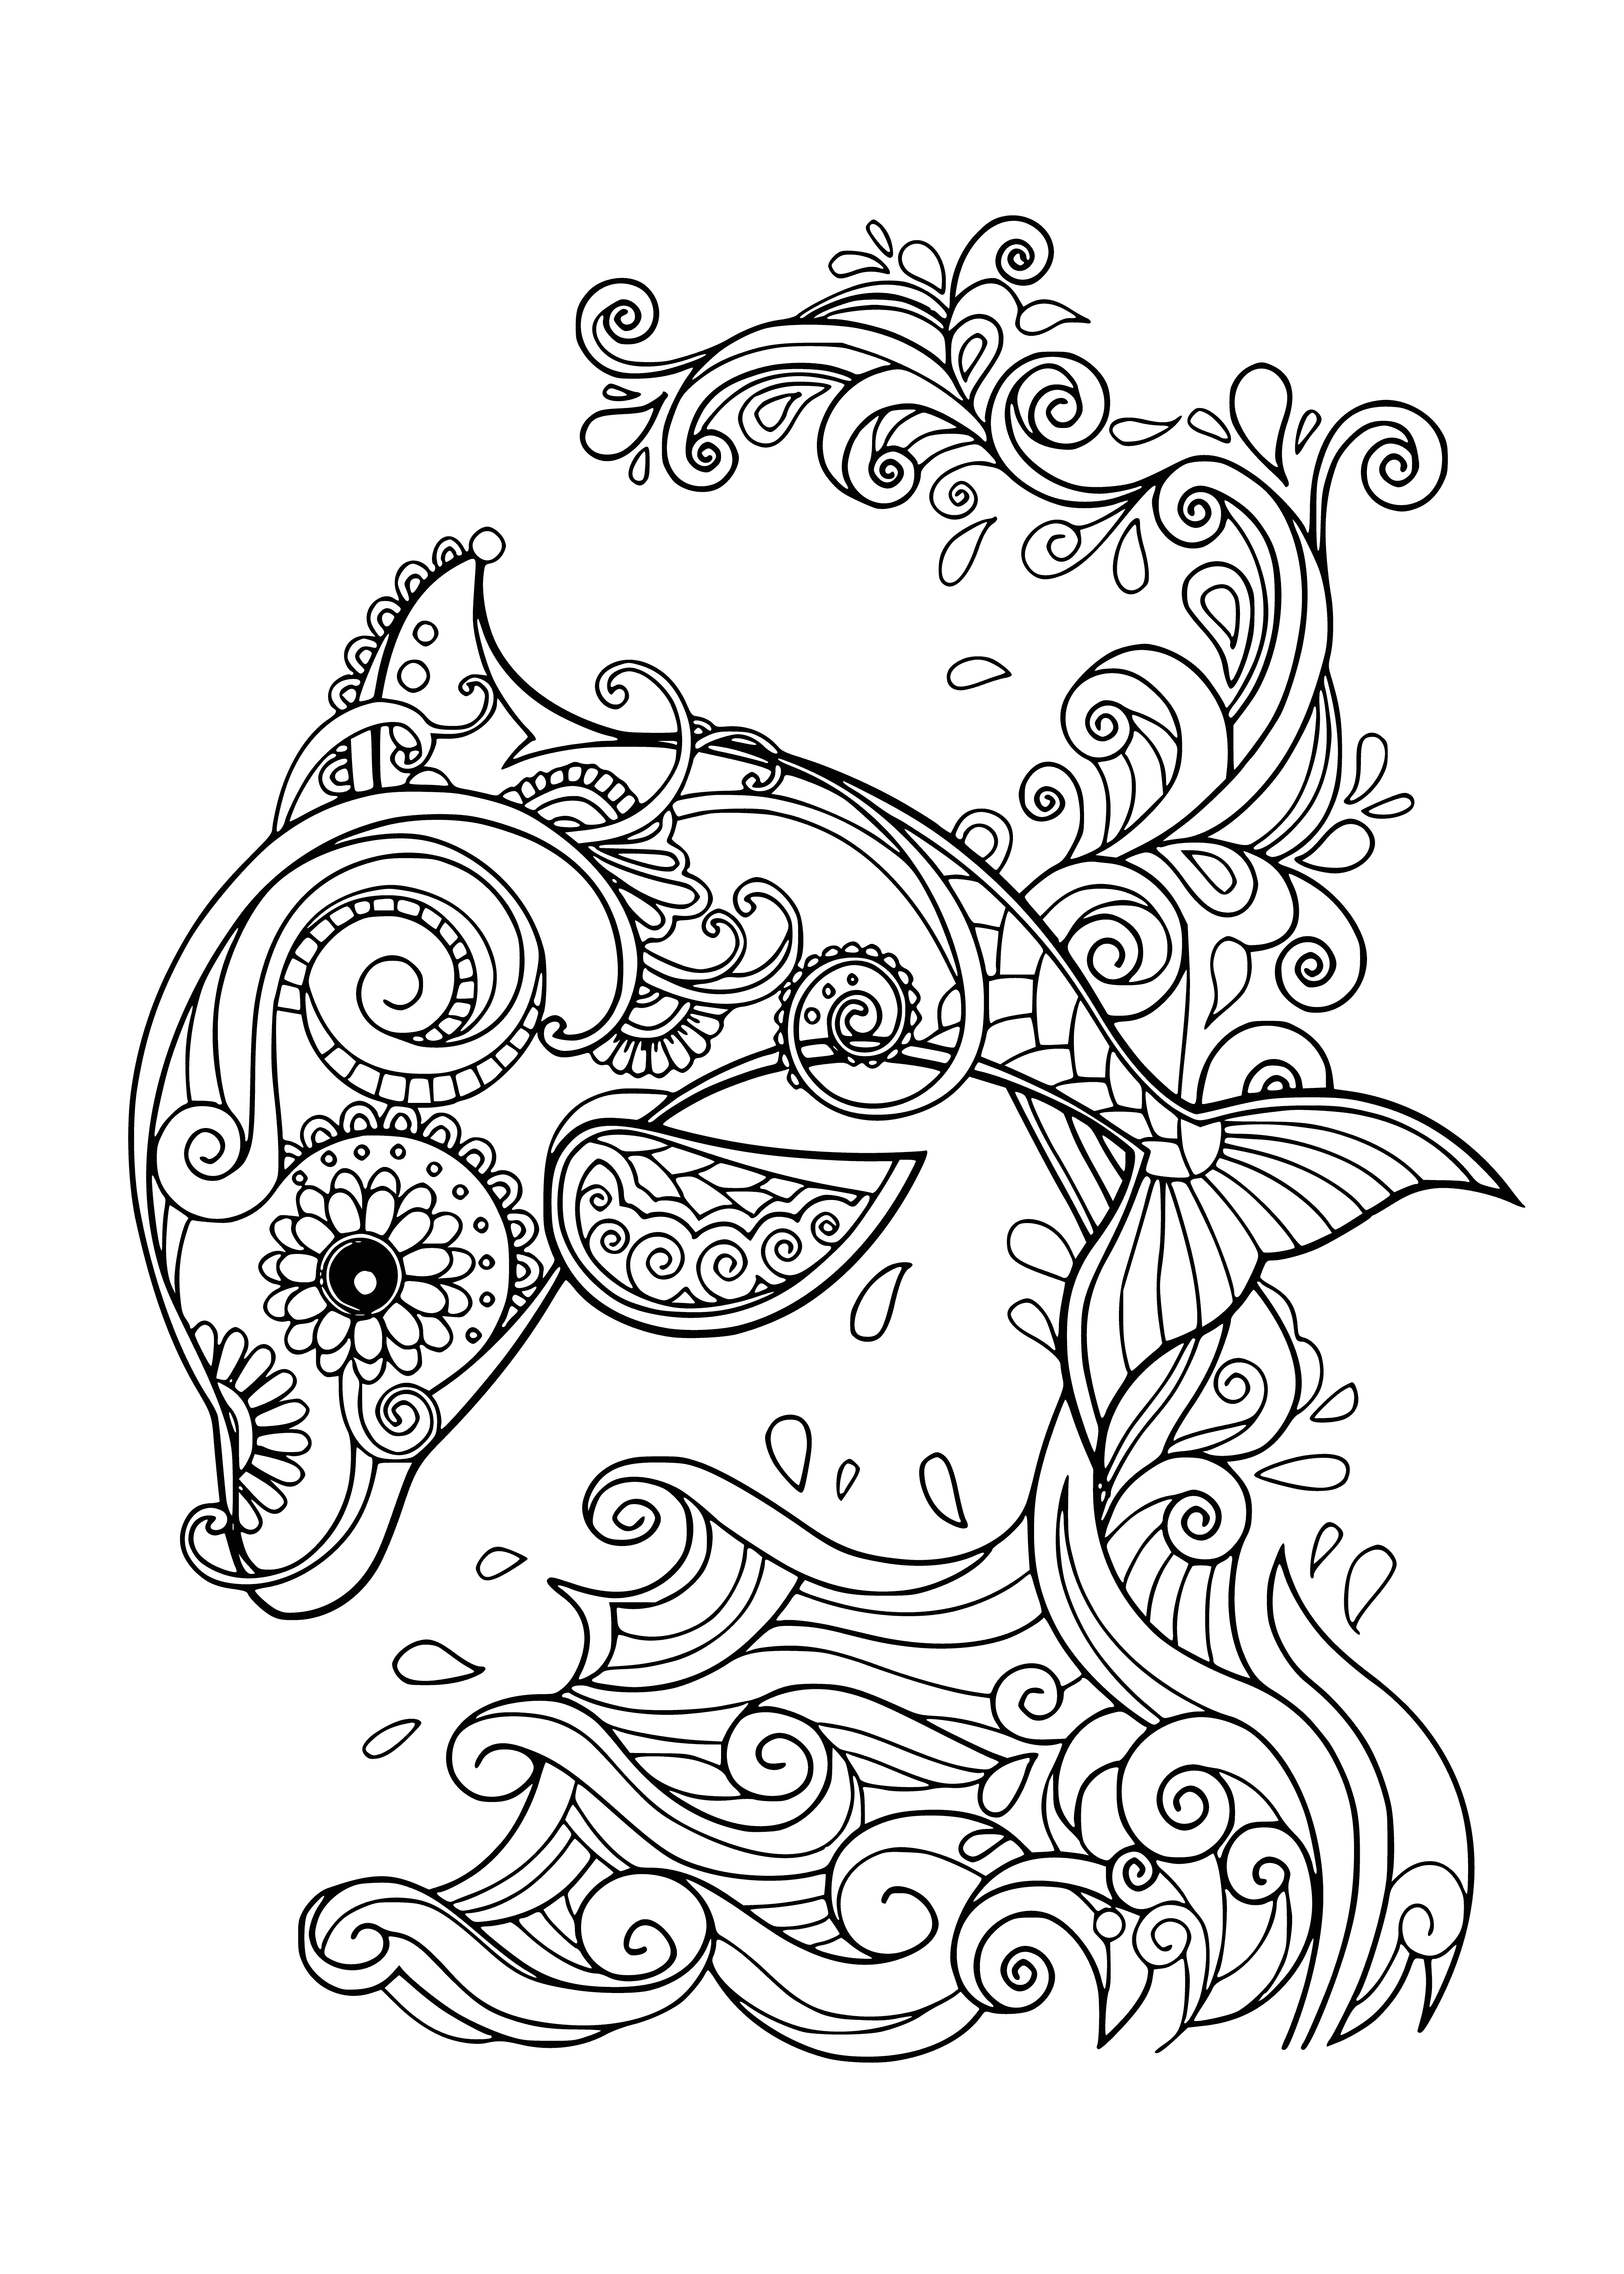 coloring page: Relax and enjoy coloring a gorgeous dolphin in the beautiful ocean! It's so calming and therapeutic. #coloringtherapy